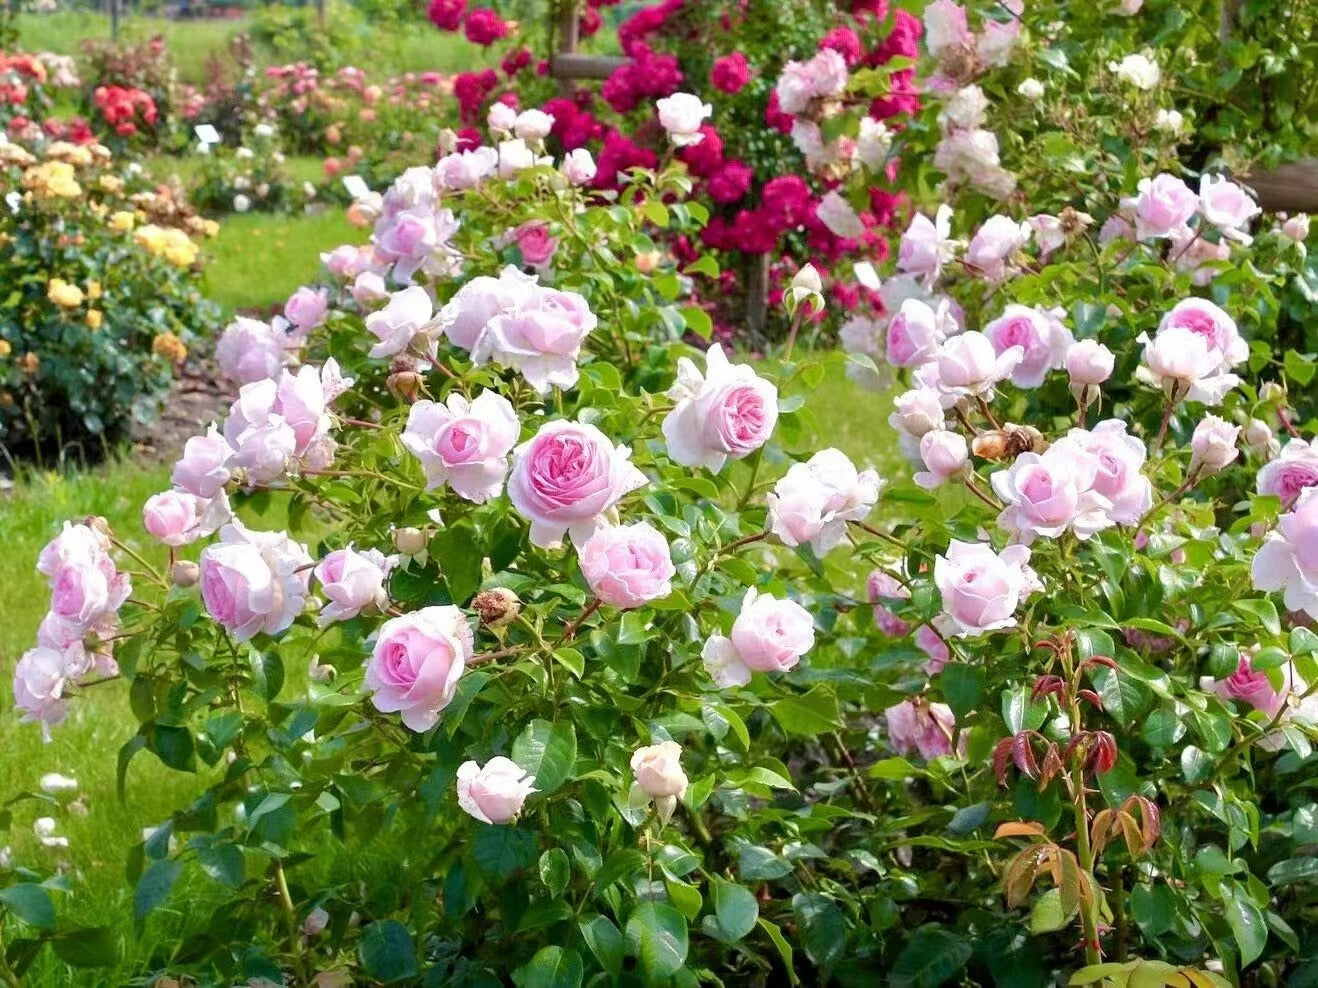 Rose【Wellenspiel】KORwimcres - 1.5 Gal Own Root LivePlant｜Award-winning| Prolific blooming| 仙女泉| Tallulah| Rain Resistant| Exquisite